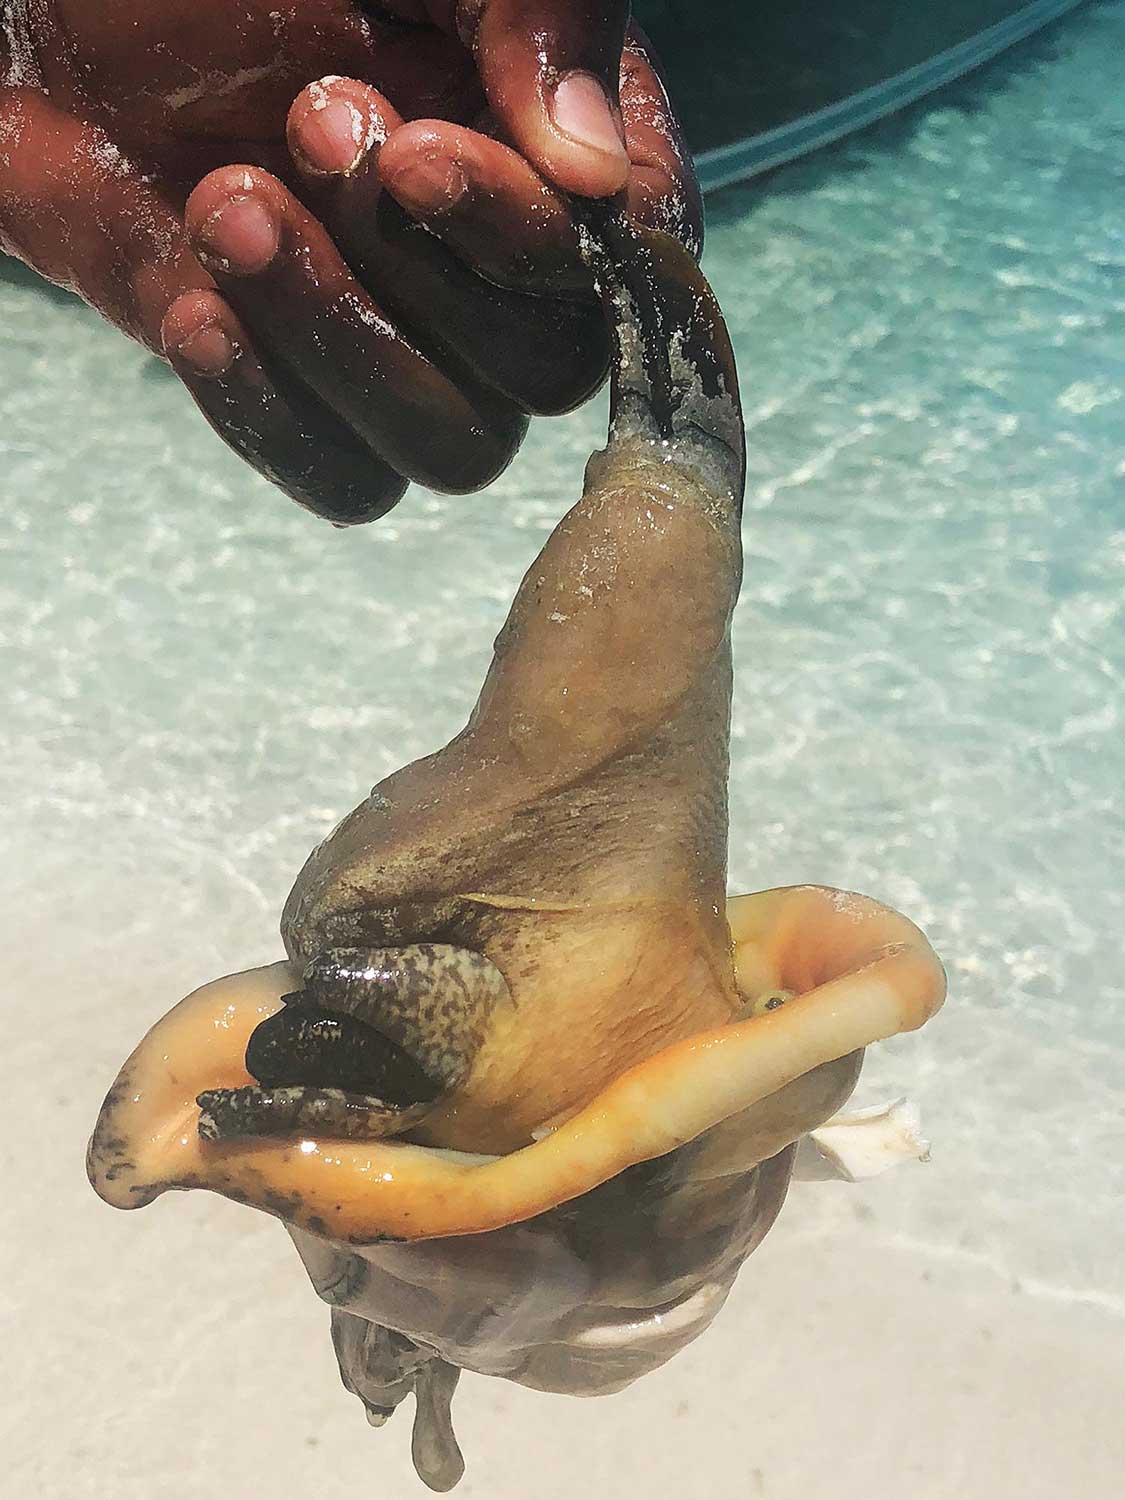 In Turks and Caicos, Conch Is Queen